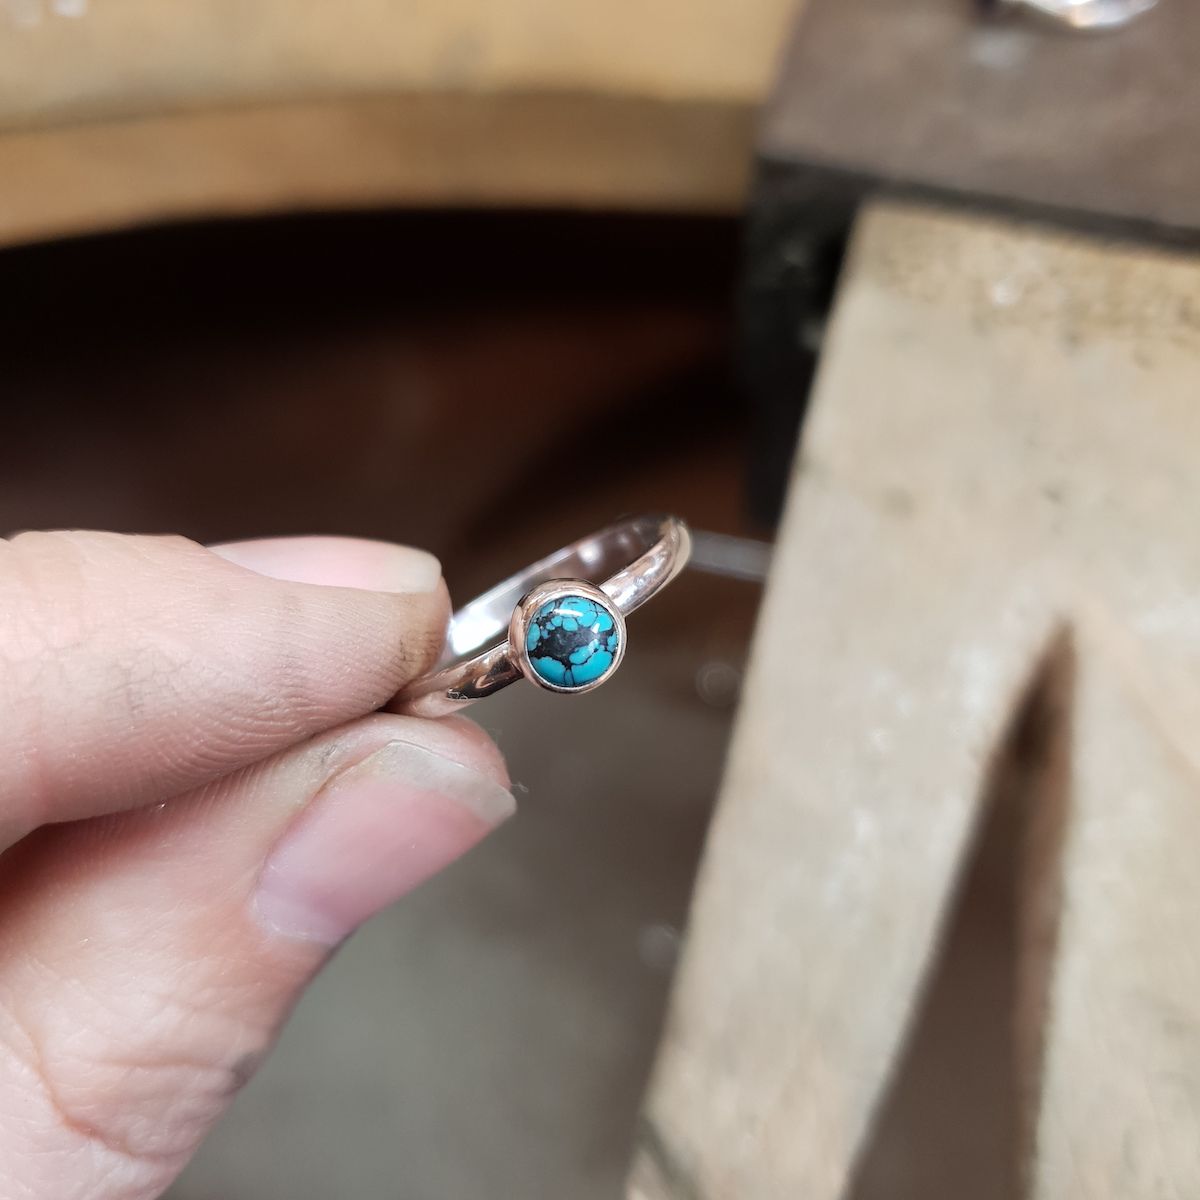 How To Make A Bezel Set Cabochon Ring, Jewellery Making Tutorial